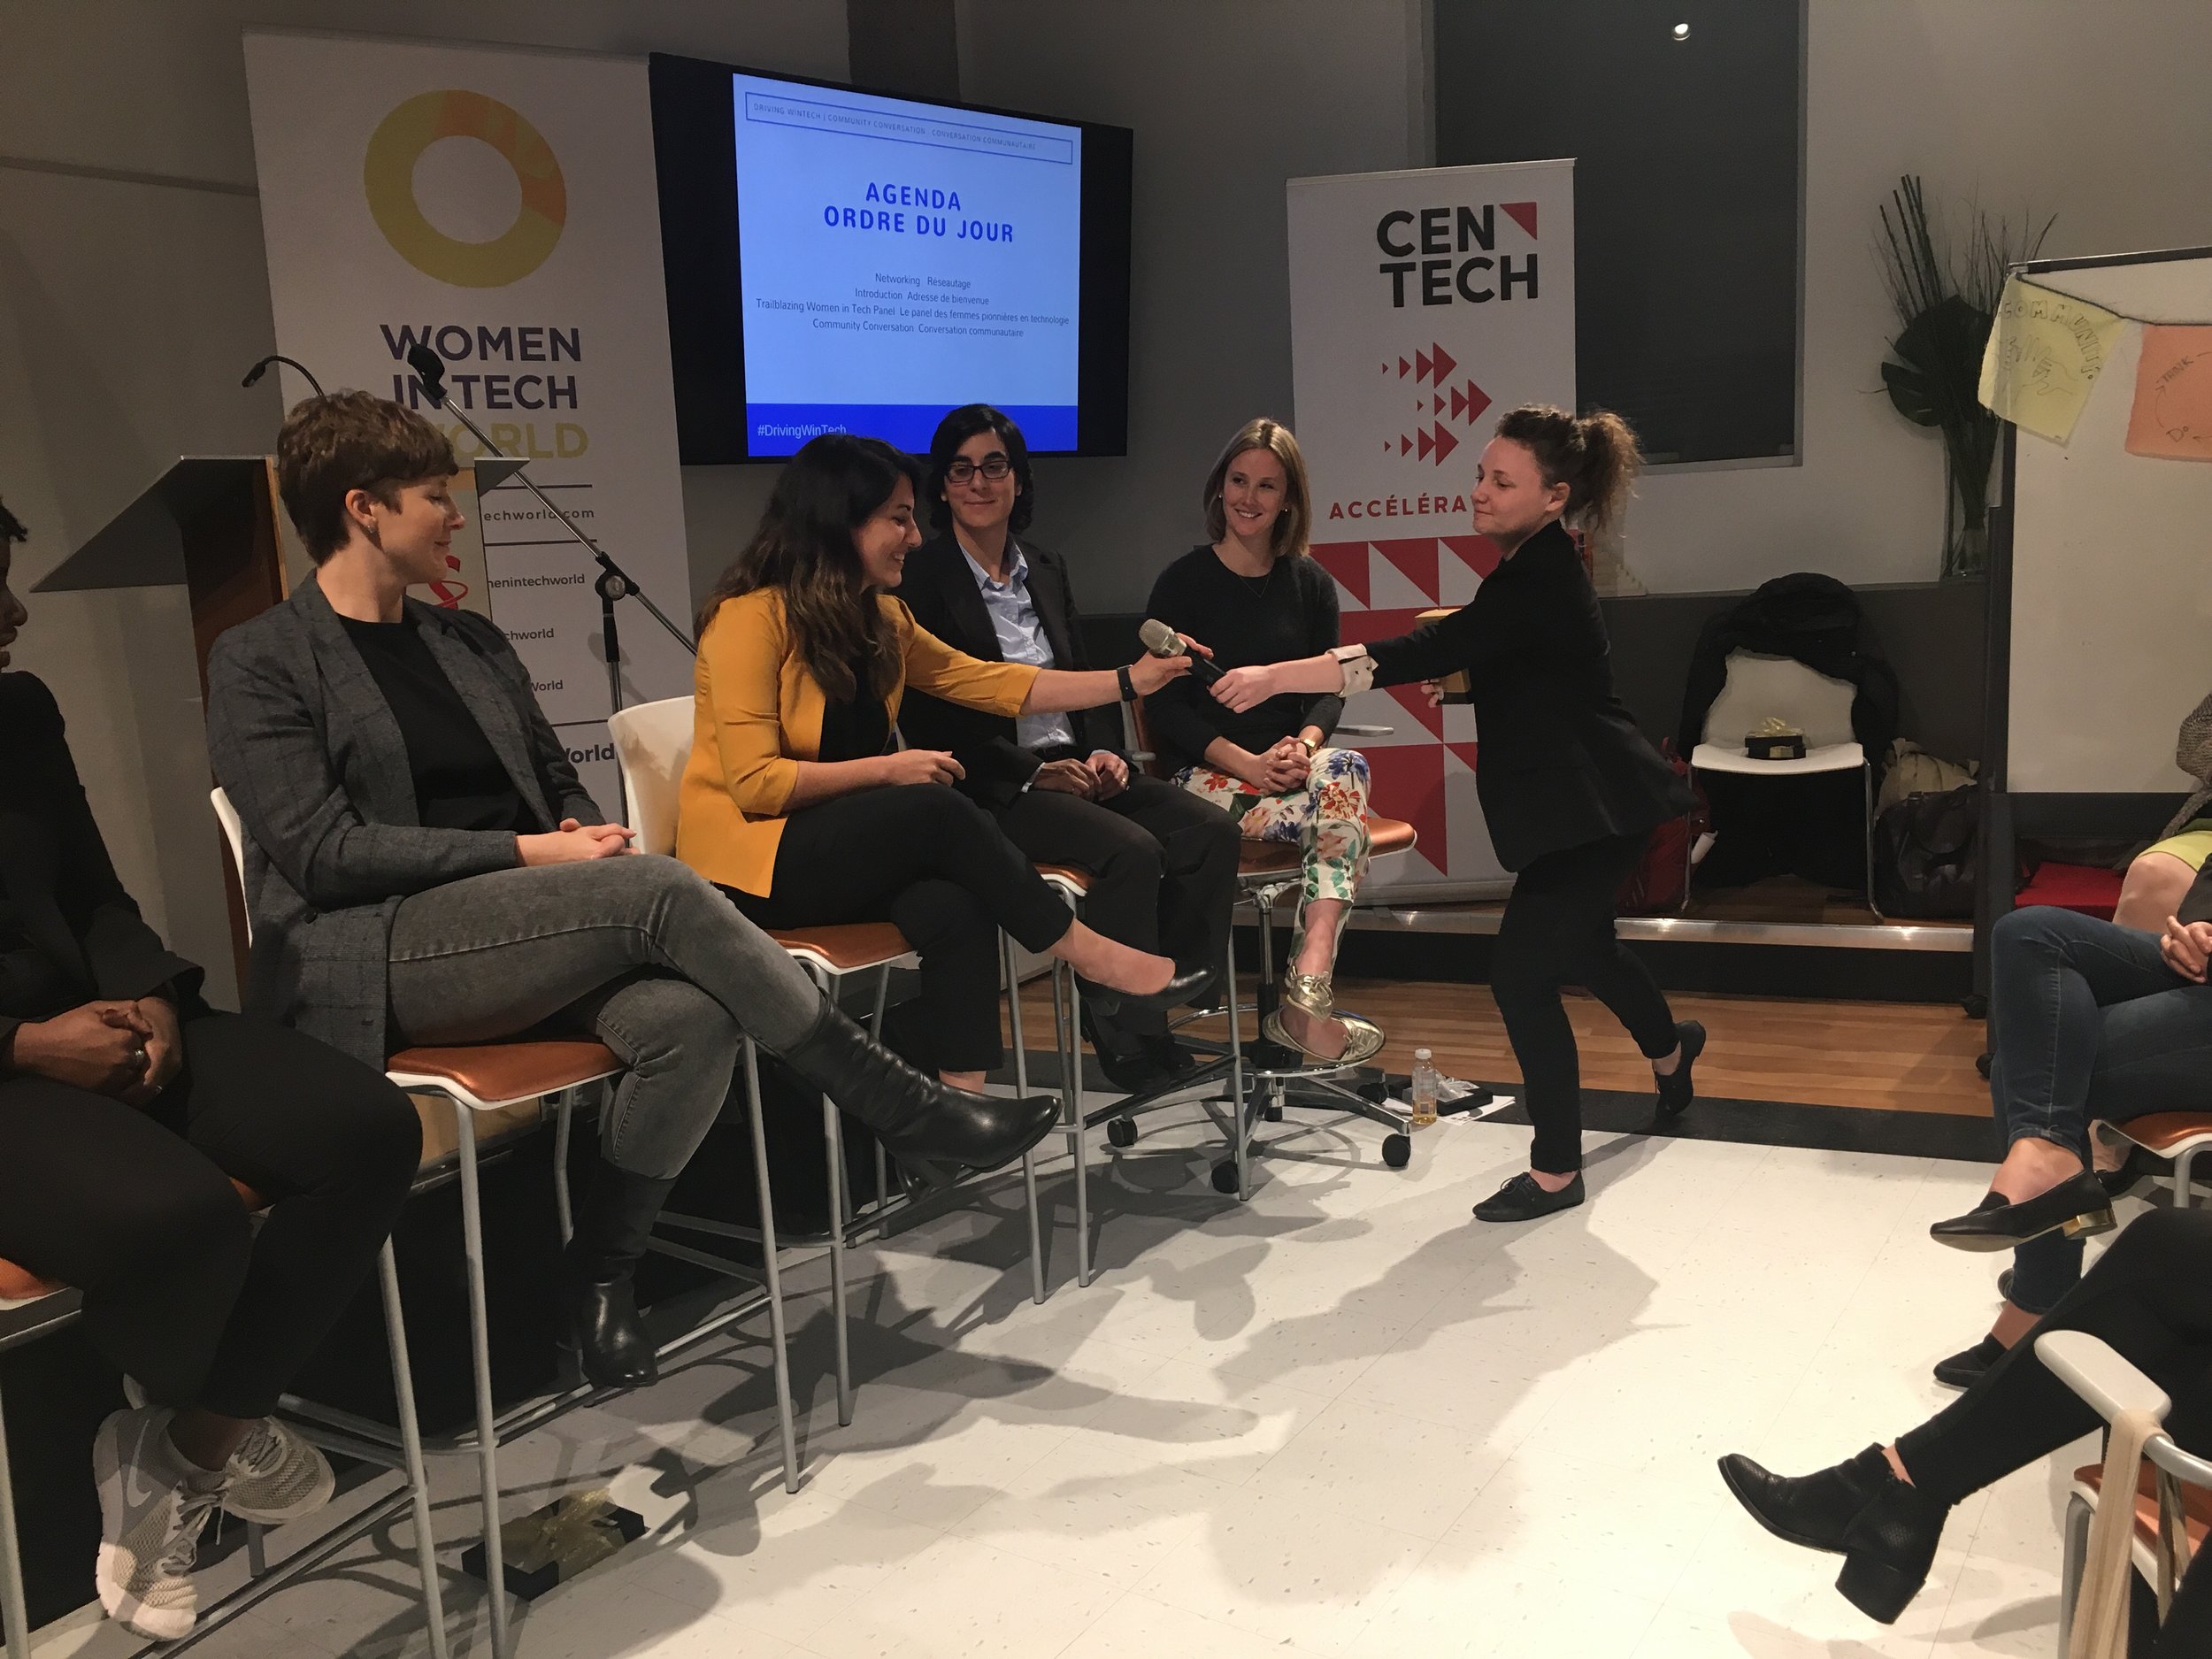  Image is of the panel in Montreal. There are five people sitting in chairs and Ali, our CEO is handing the mic to the person sitting in the middle.  